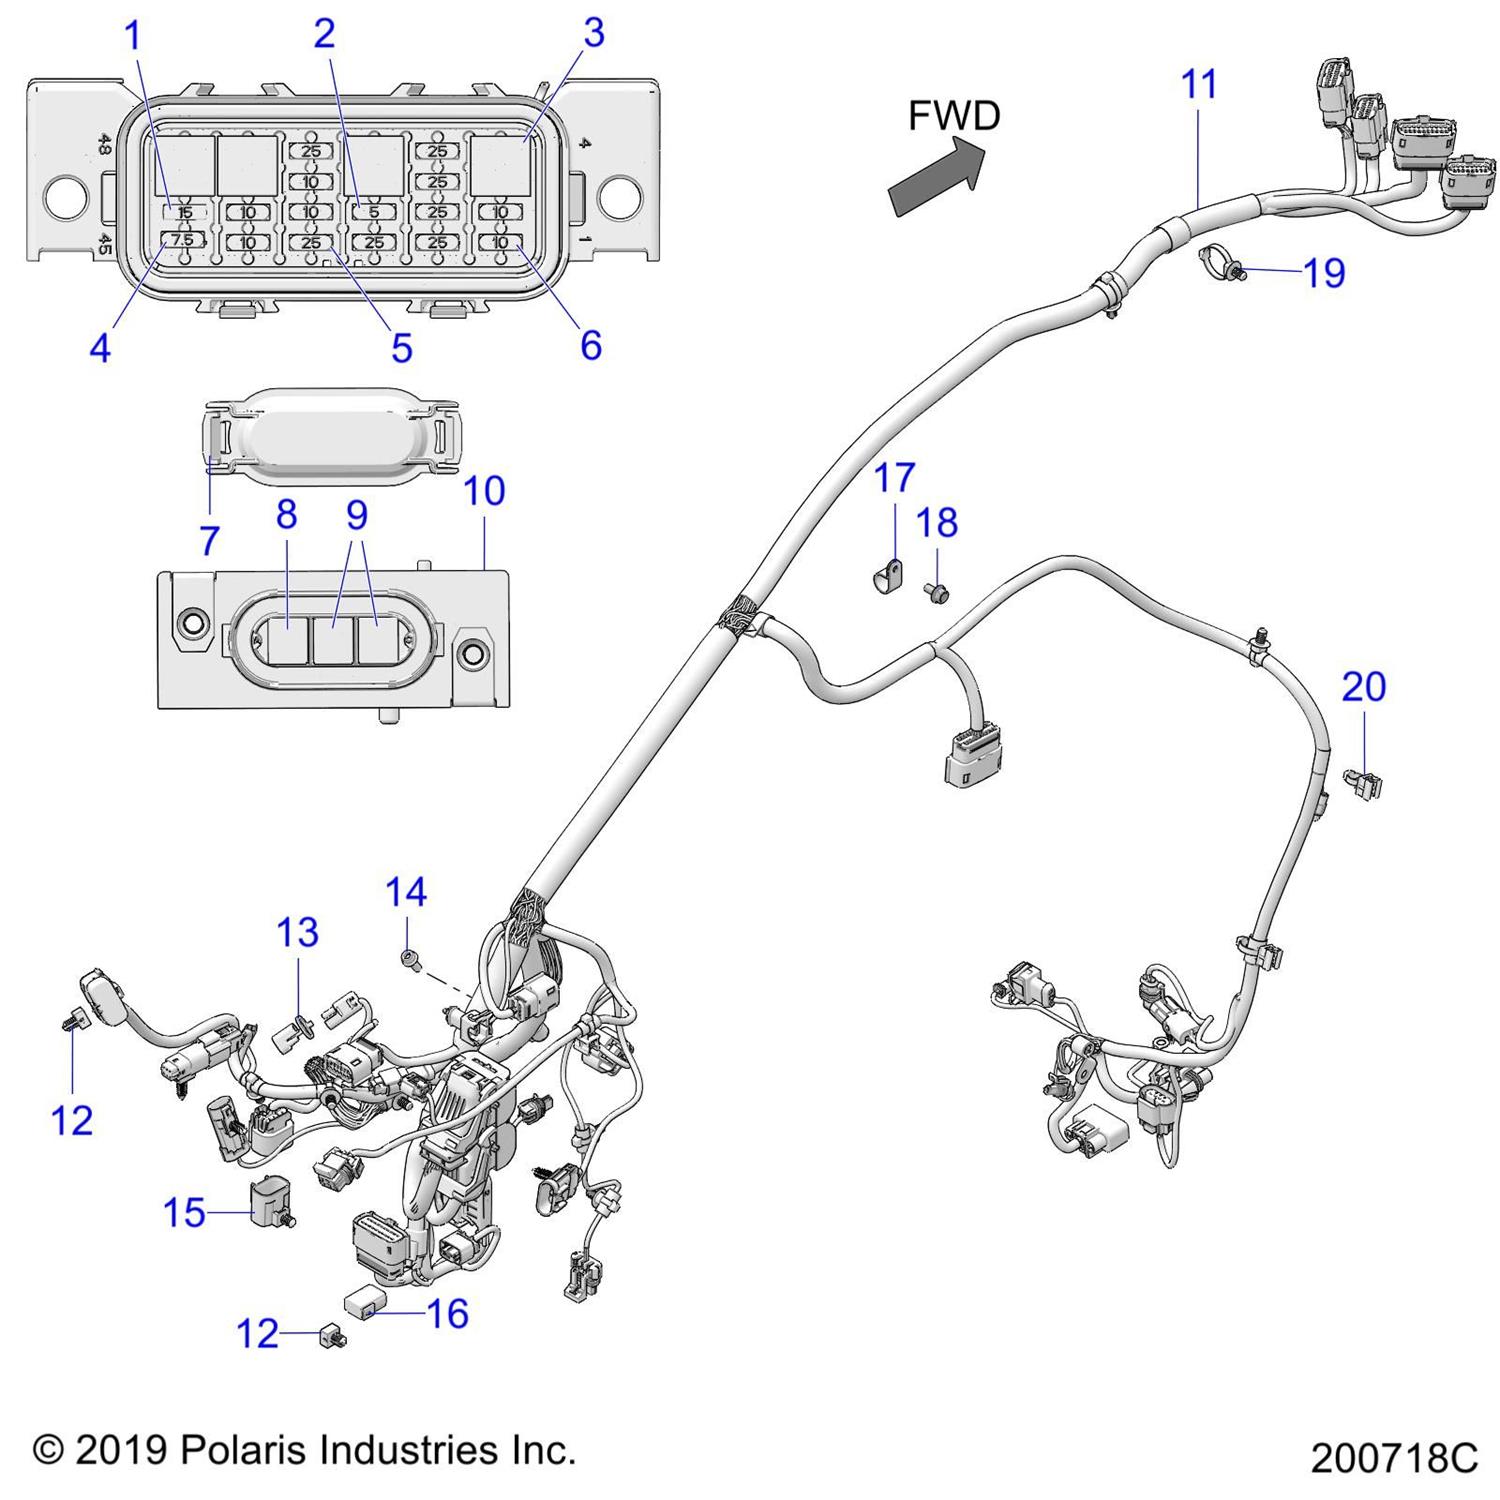 HARNESS-CHASSIS,HWLC,G1,V1 [INCL. 1-13,15,16,20]